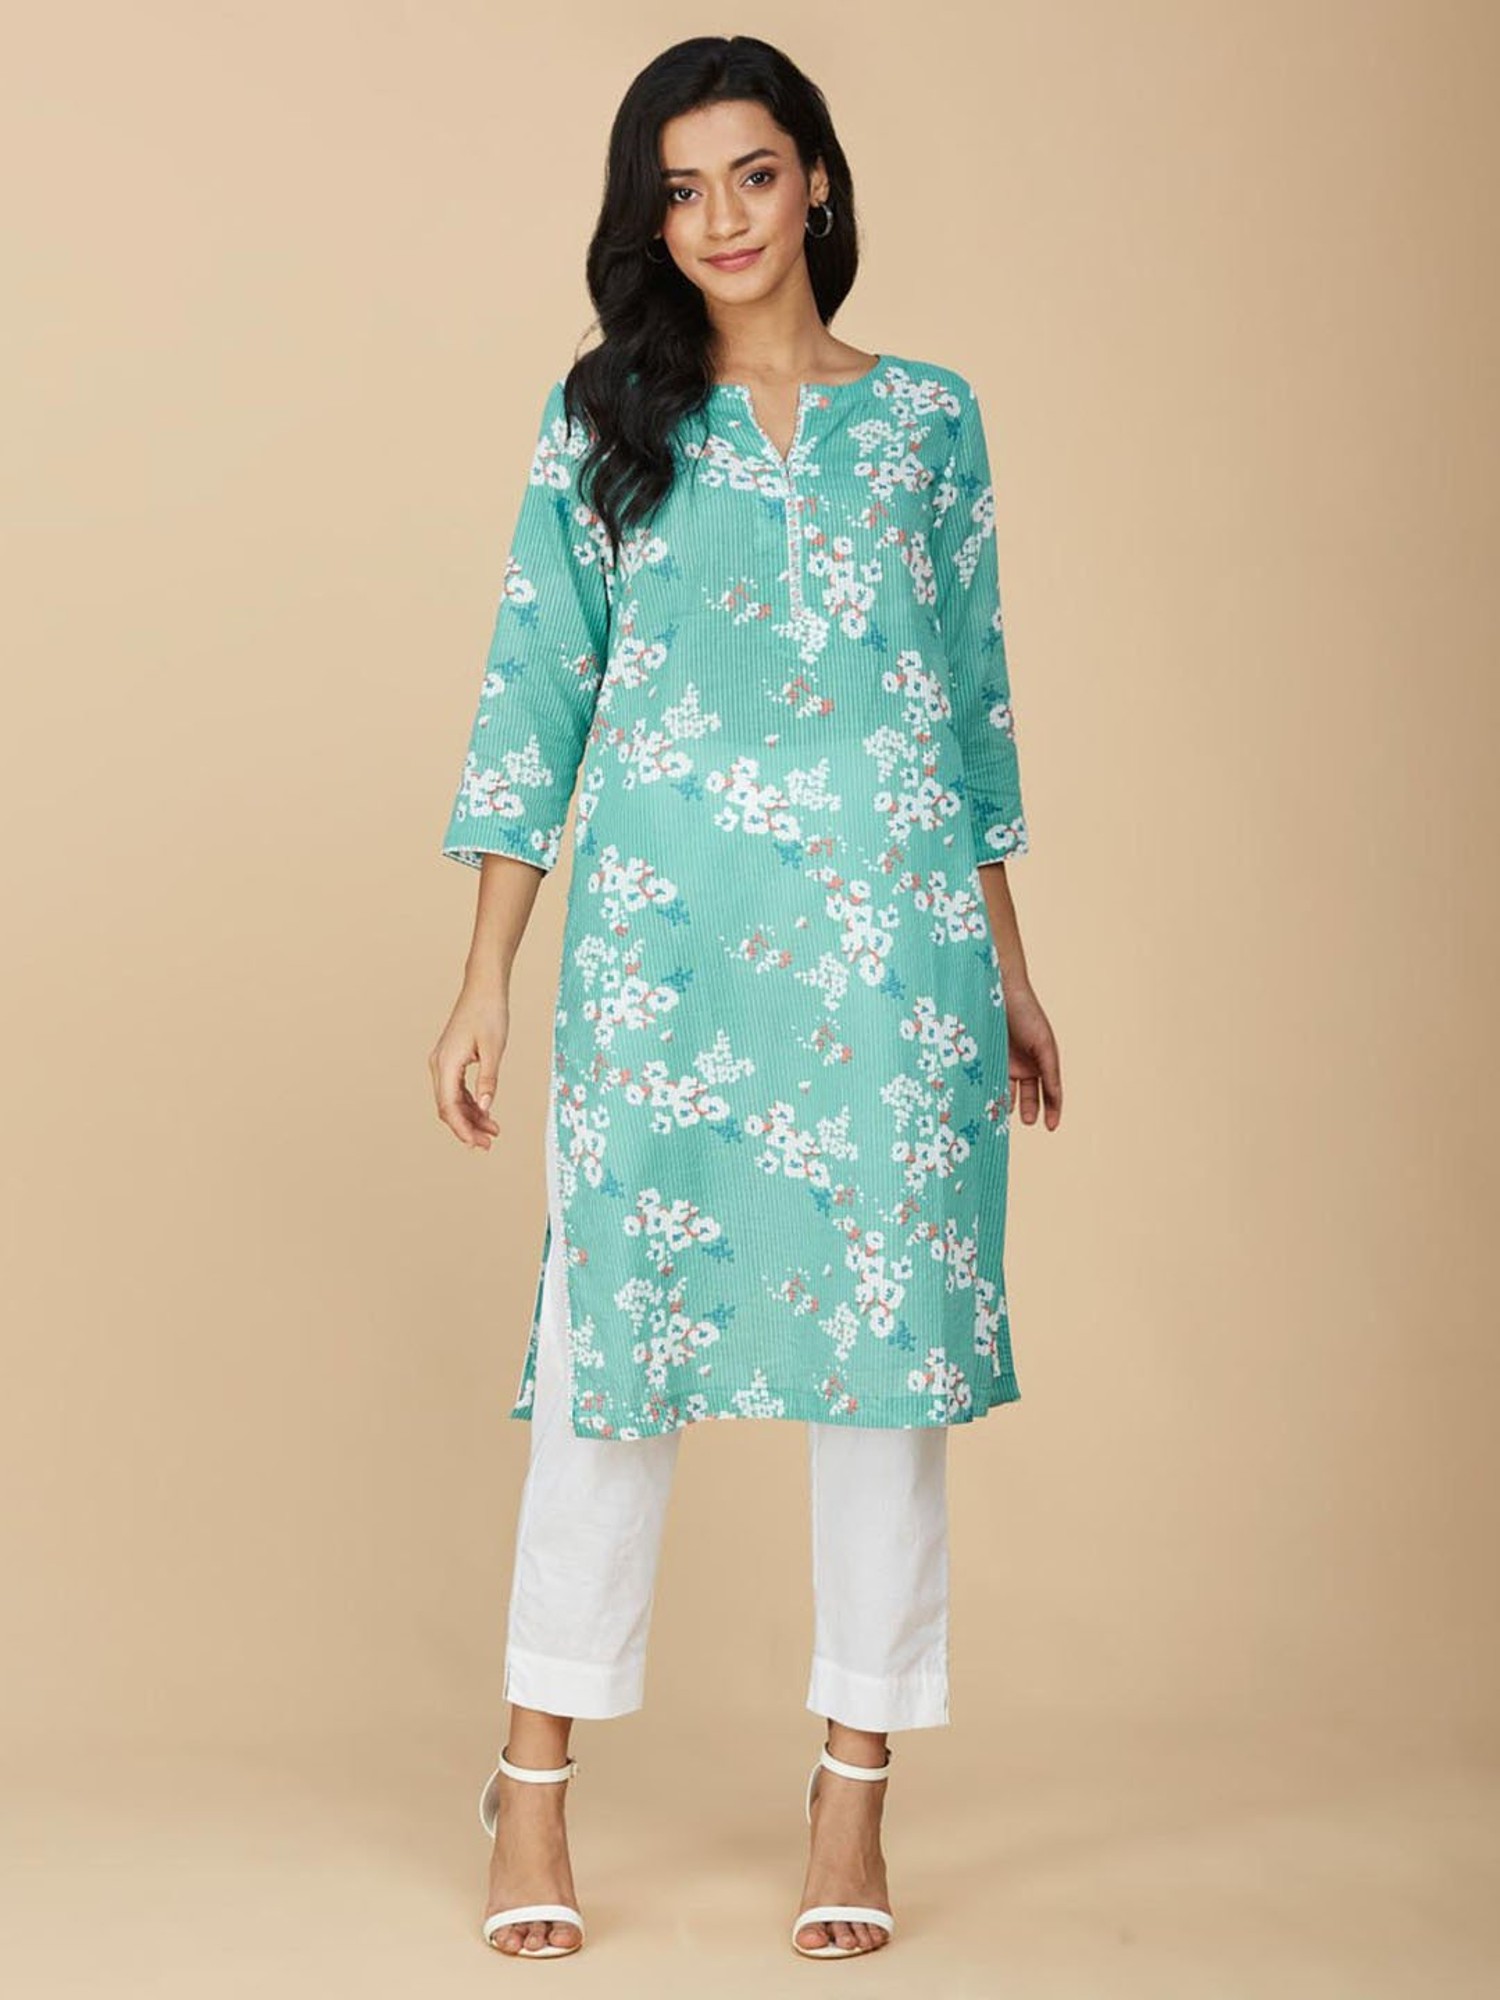 Top more than 143 fabindia kurti new collection best